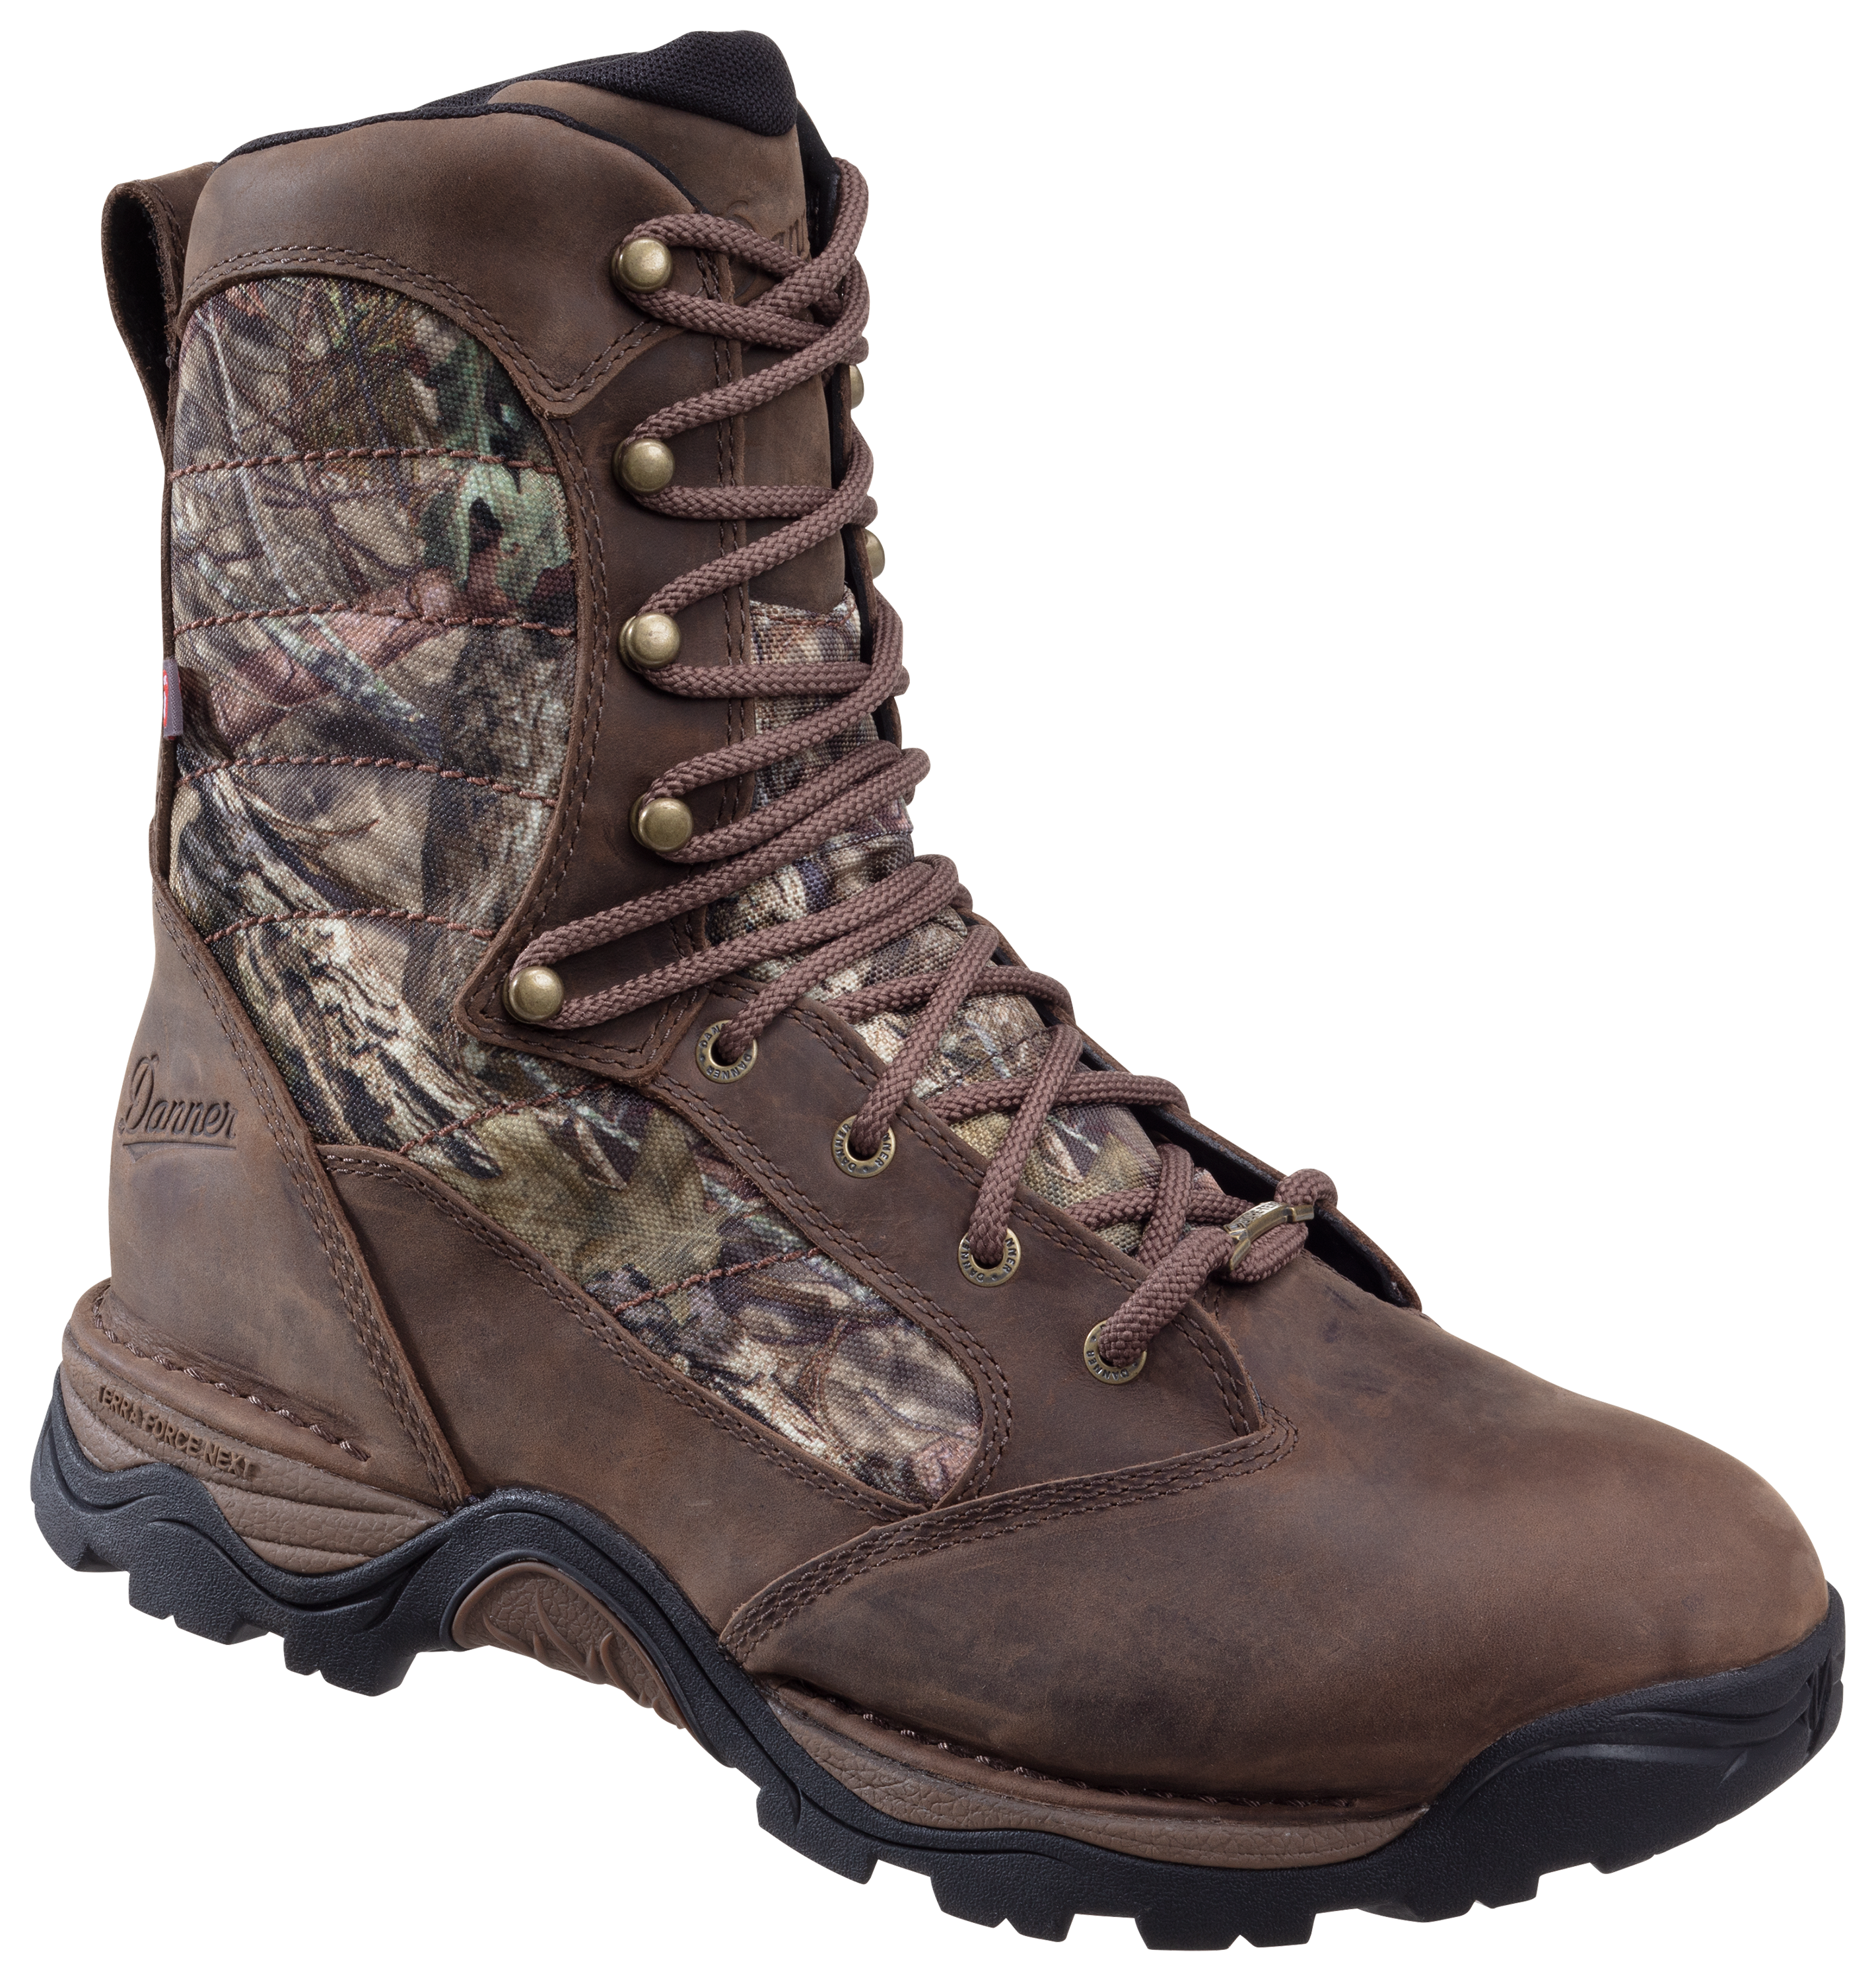 Danner Pronghorn 800 Insulated GORE-TEX Hunting Boots for Men - Mossy Oak Break-Up Country - 9M